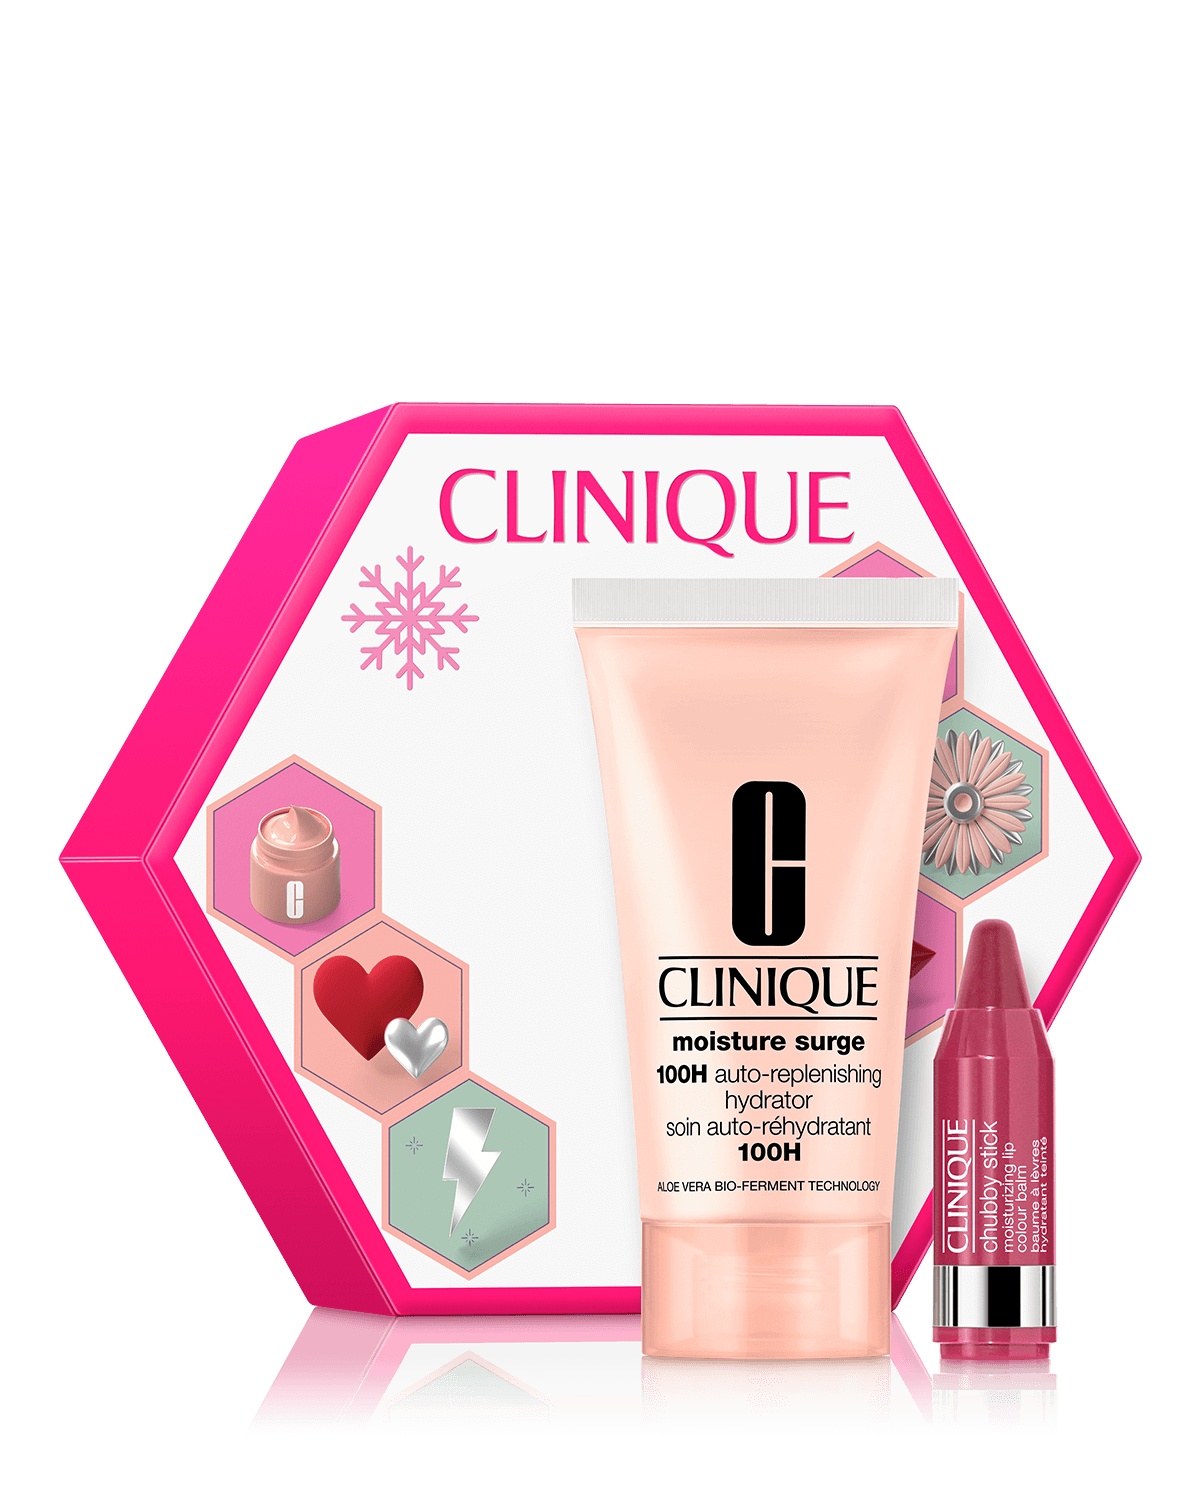 Clinique Gift Sets Up to 50% Off: Merry Moisture $6.50, 2-Pack 3.8-Oz Take The Day Off Cleansing Balm $36, Day to Night Skin Care Set $49.50 & More + Free Shipping